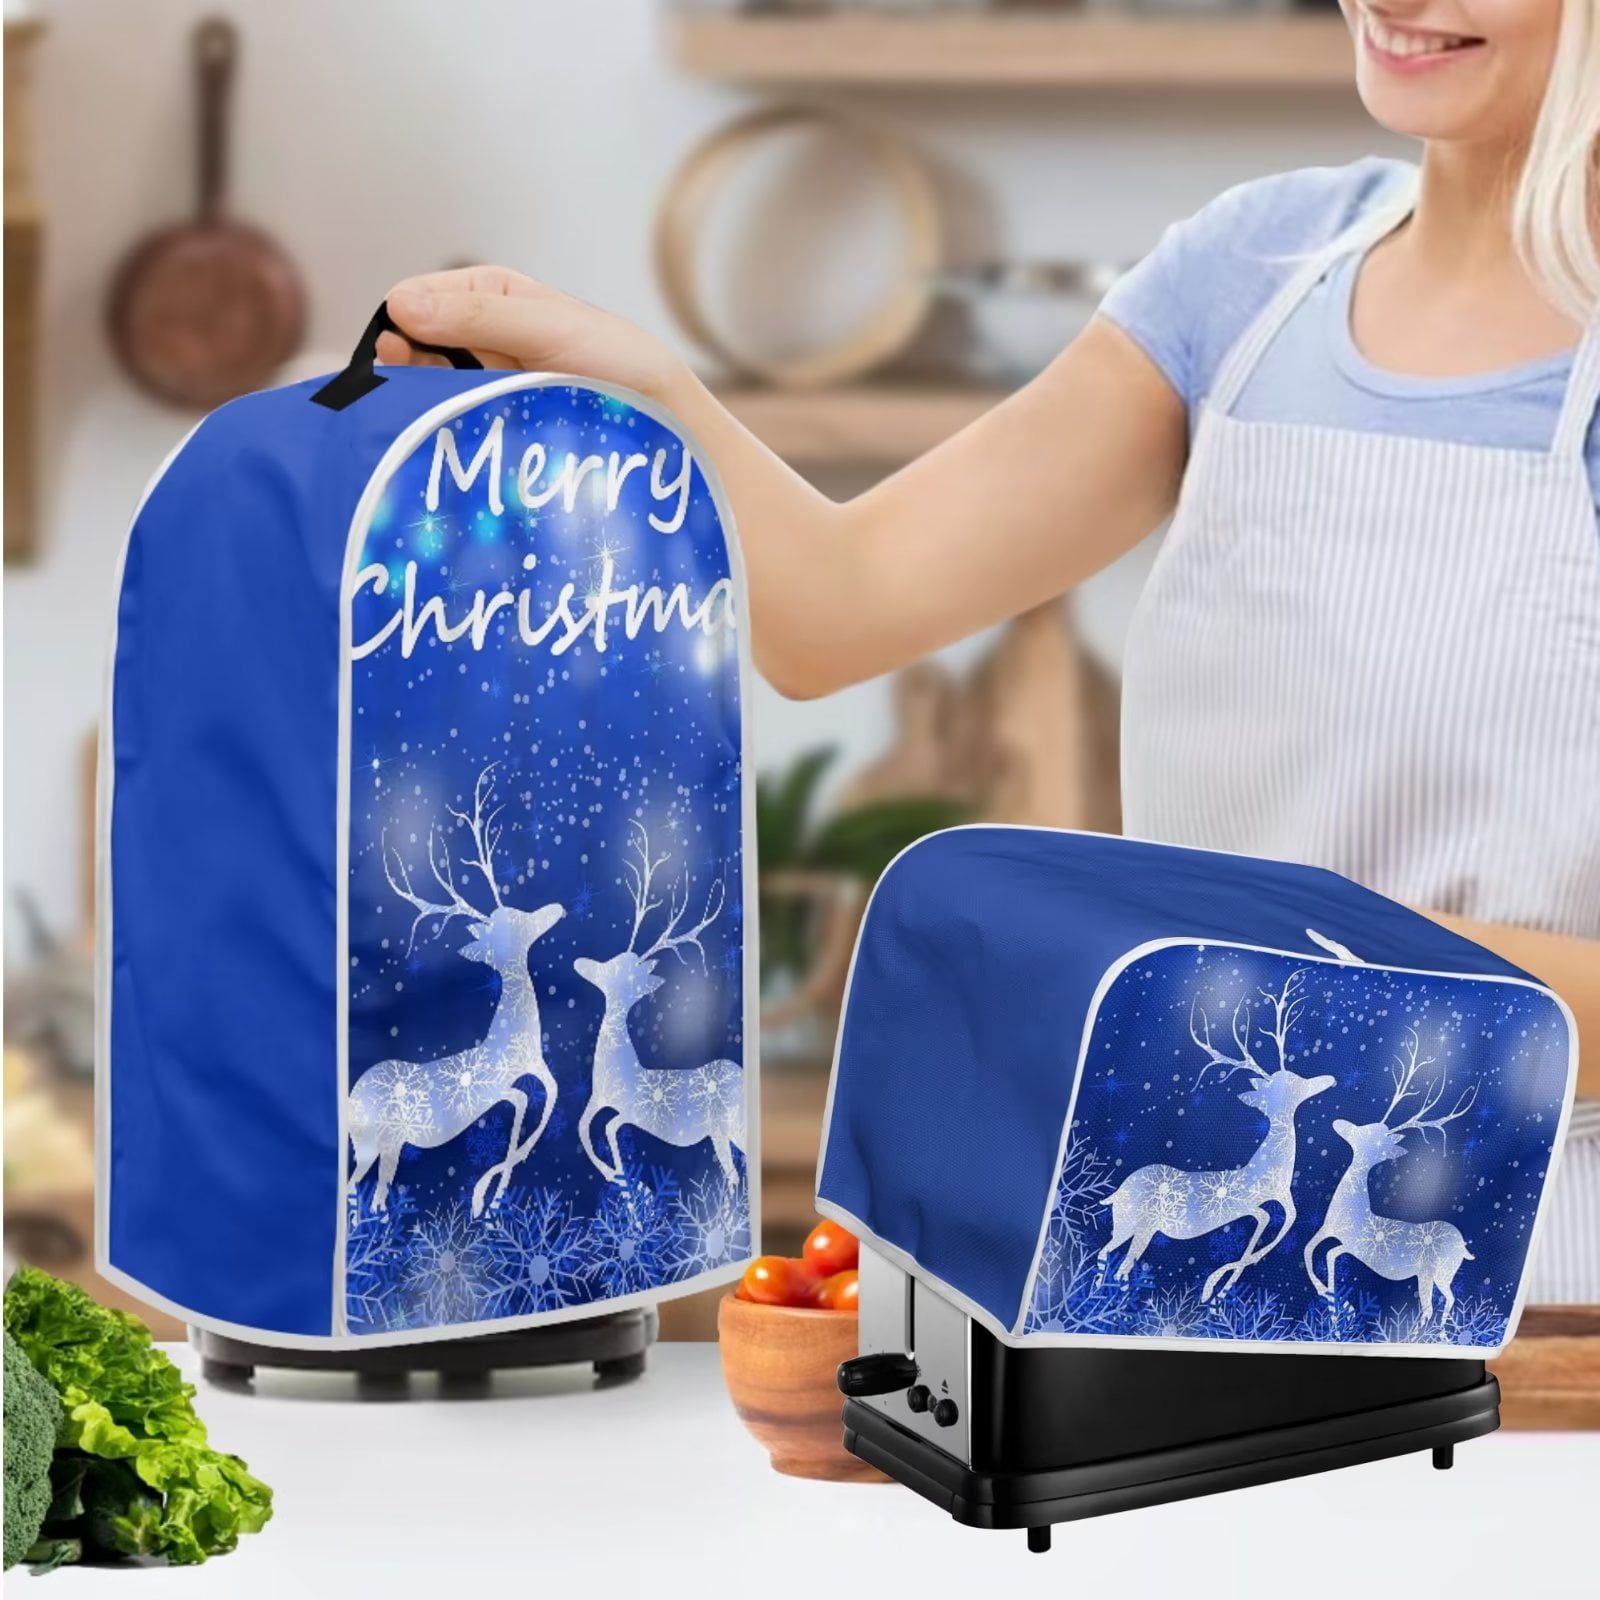  Psesaysky Christmas Snowman Toaster Covers Christmas Decor  Bakeware Protector Waterproof Toaster Covers Dust Covers for 2 Slice  Toaster with Top Hook : Home & Kitchen